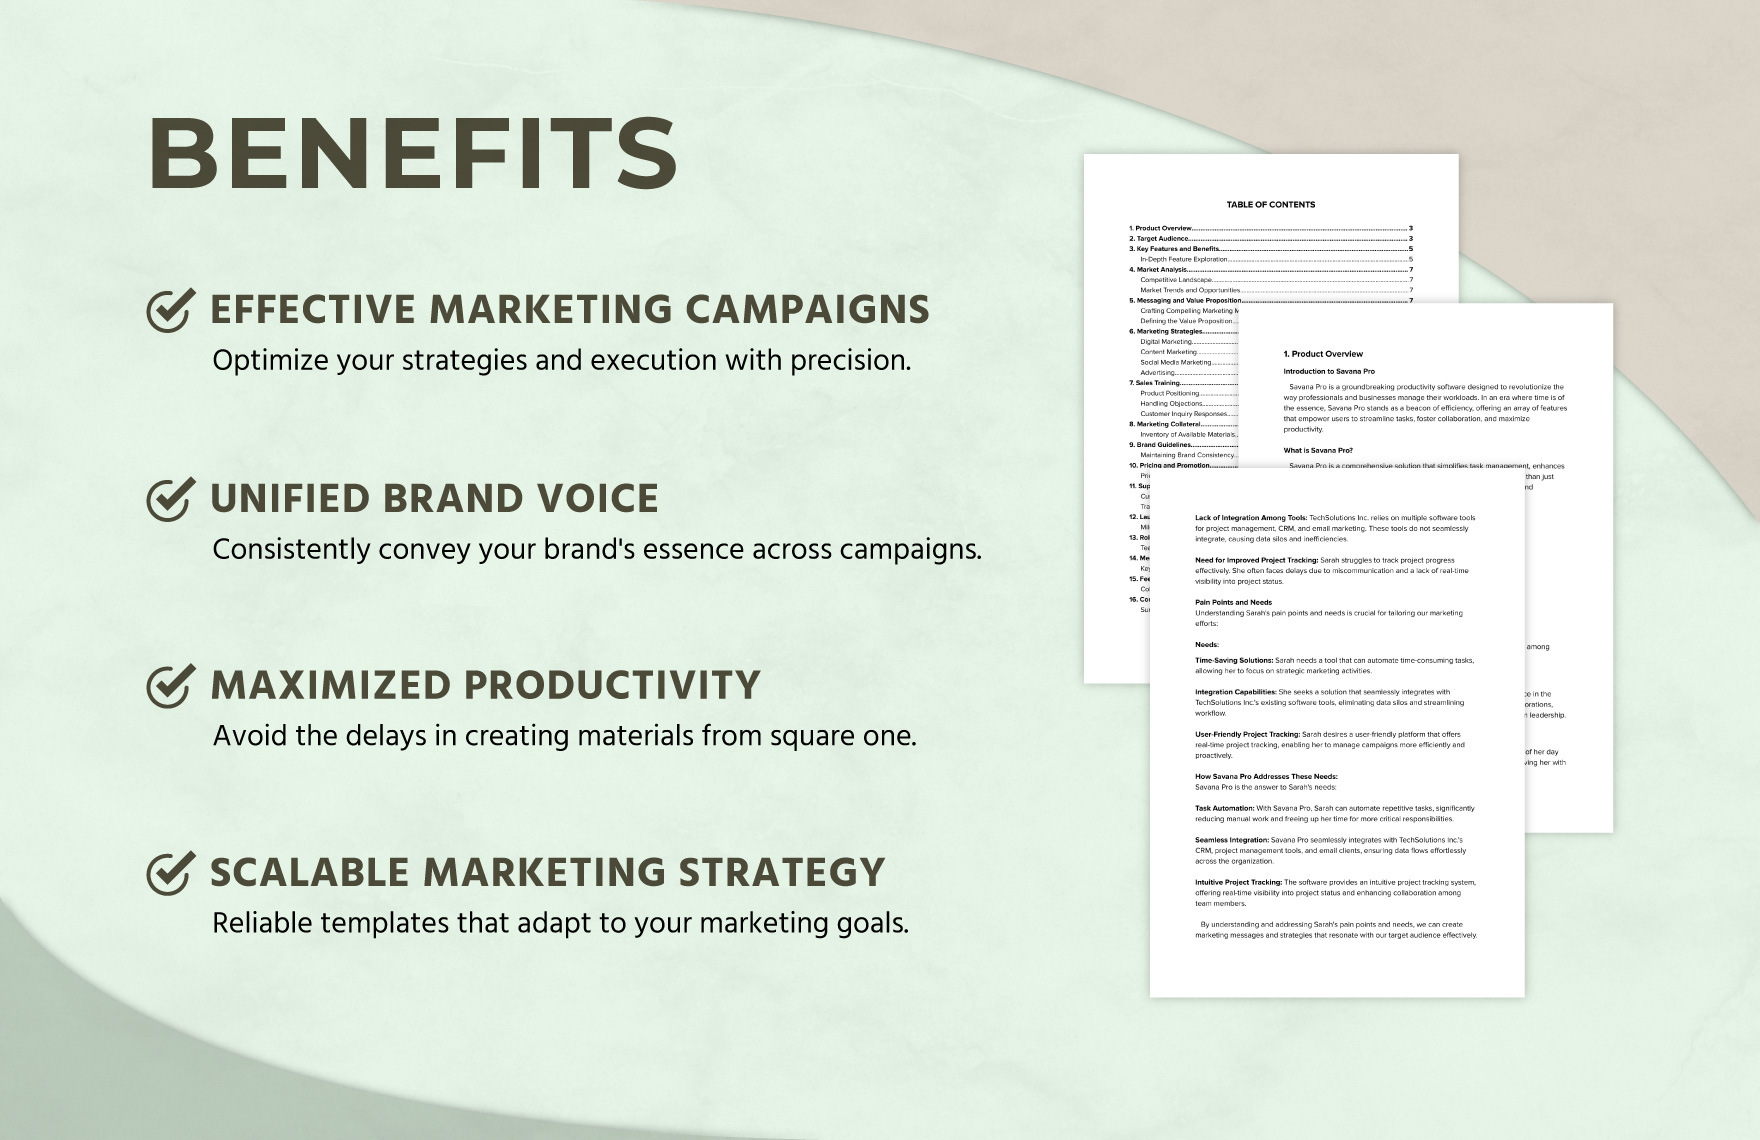 Marketing Product Launch Curriculum for Teams Template